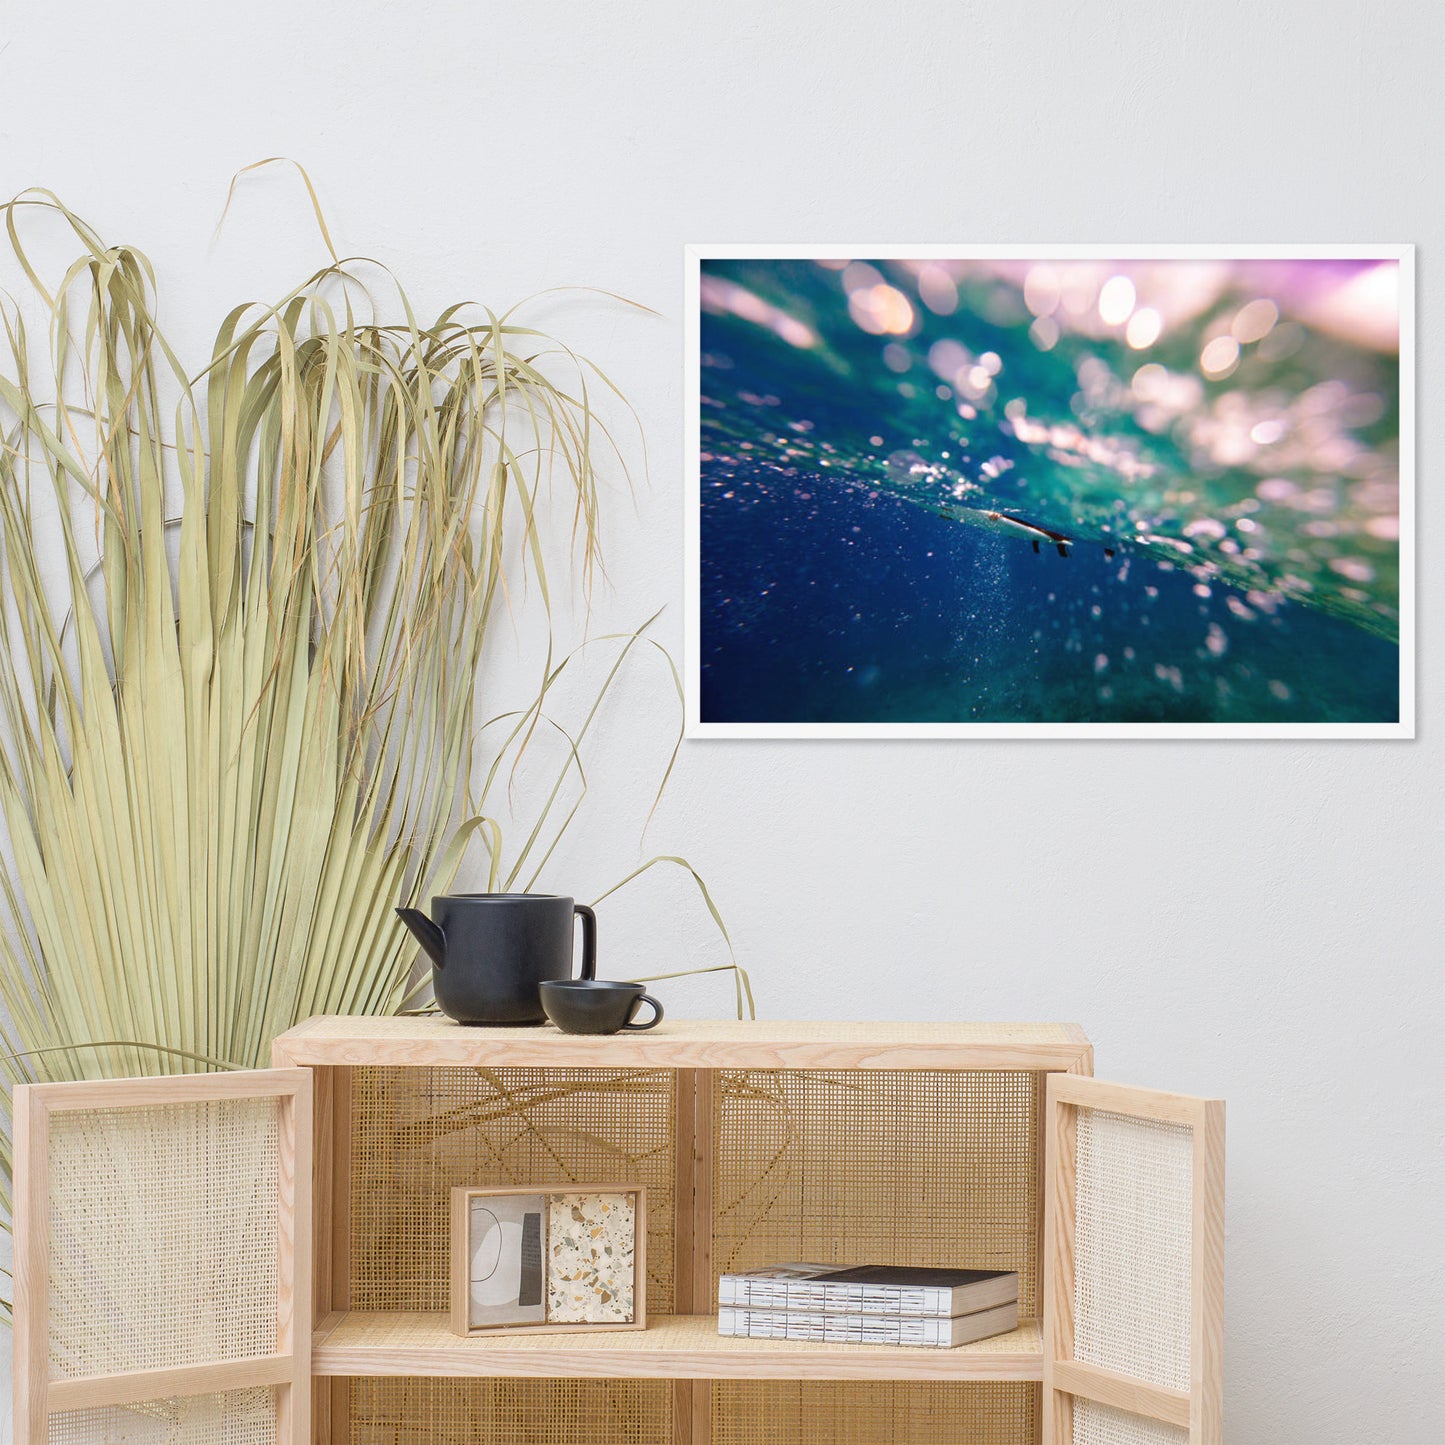 Bubble Trouble Coastal Abstract Lifestyle Photograph Framed Wall Art Print